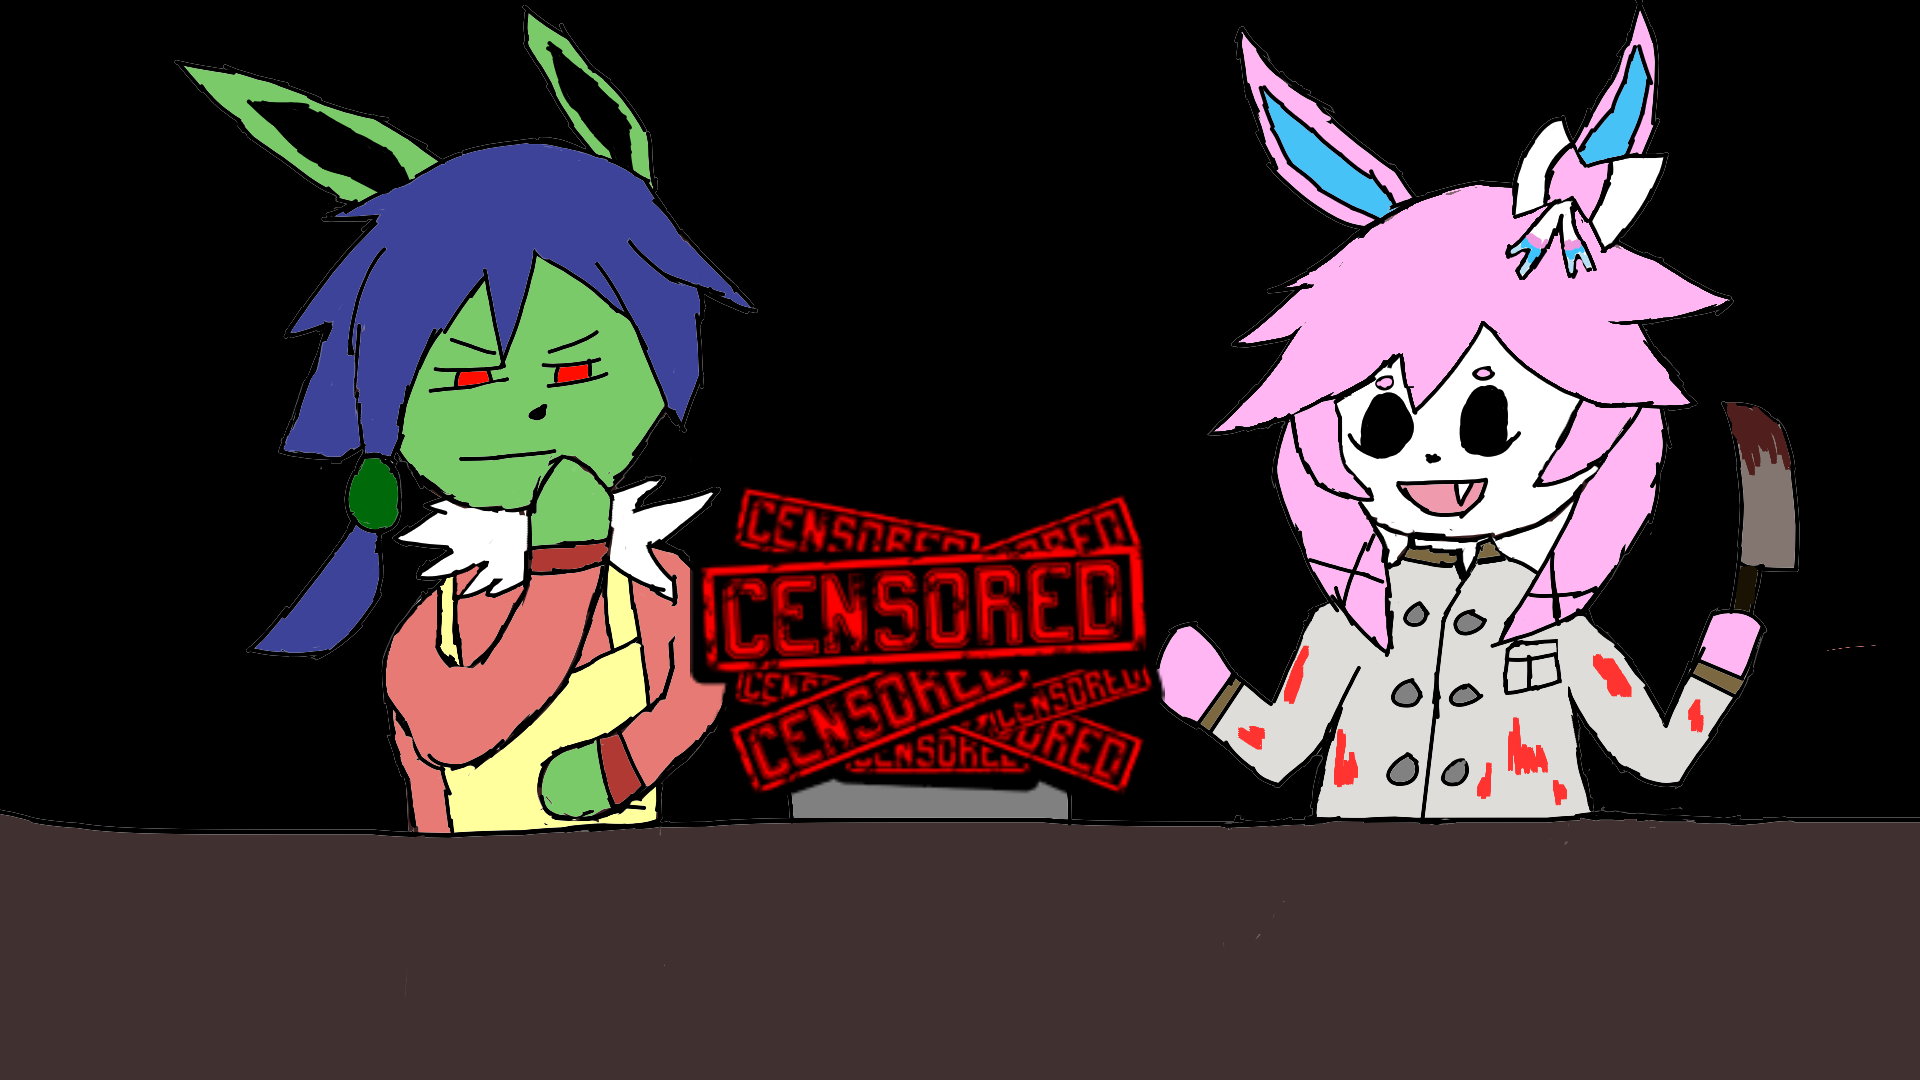 professional cook meets a district 23 chef by Palerabbit051